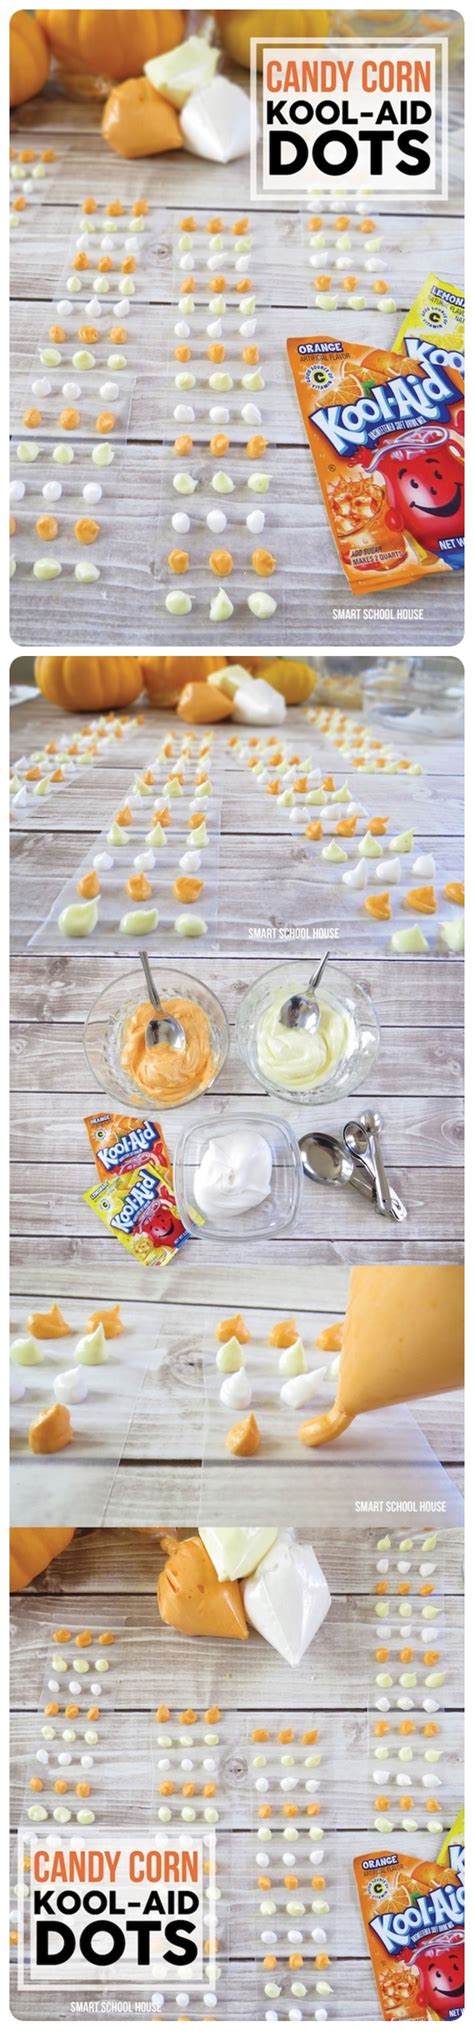 Diy Candy Corn Kool Aid Dots Pictures Photos And Images For Facebook